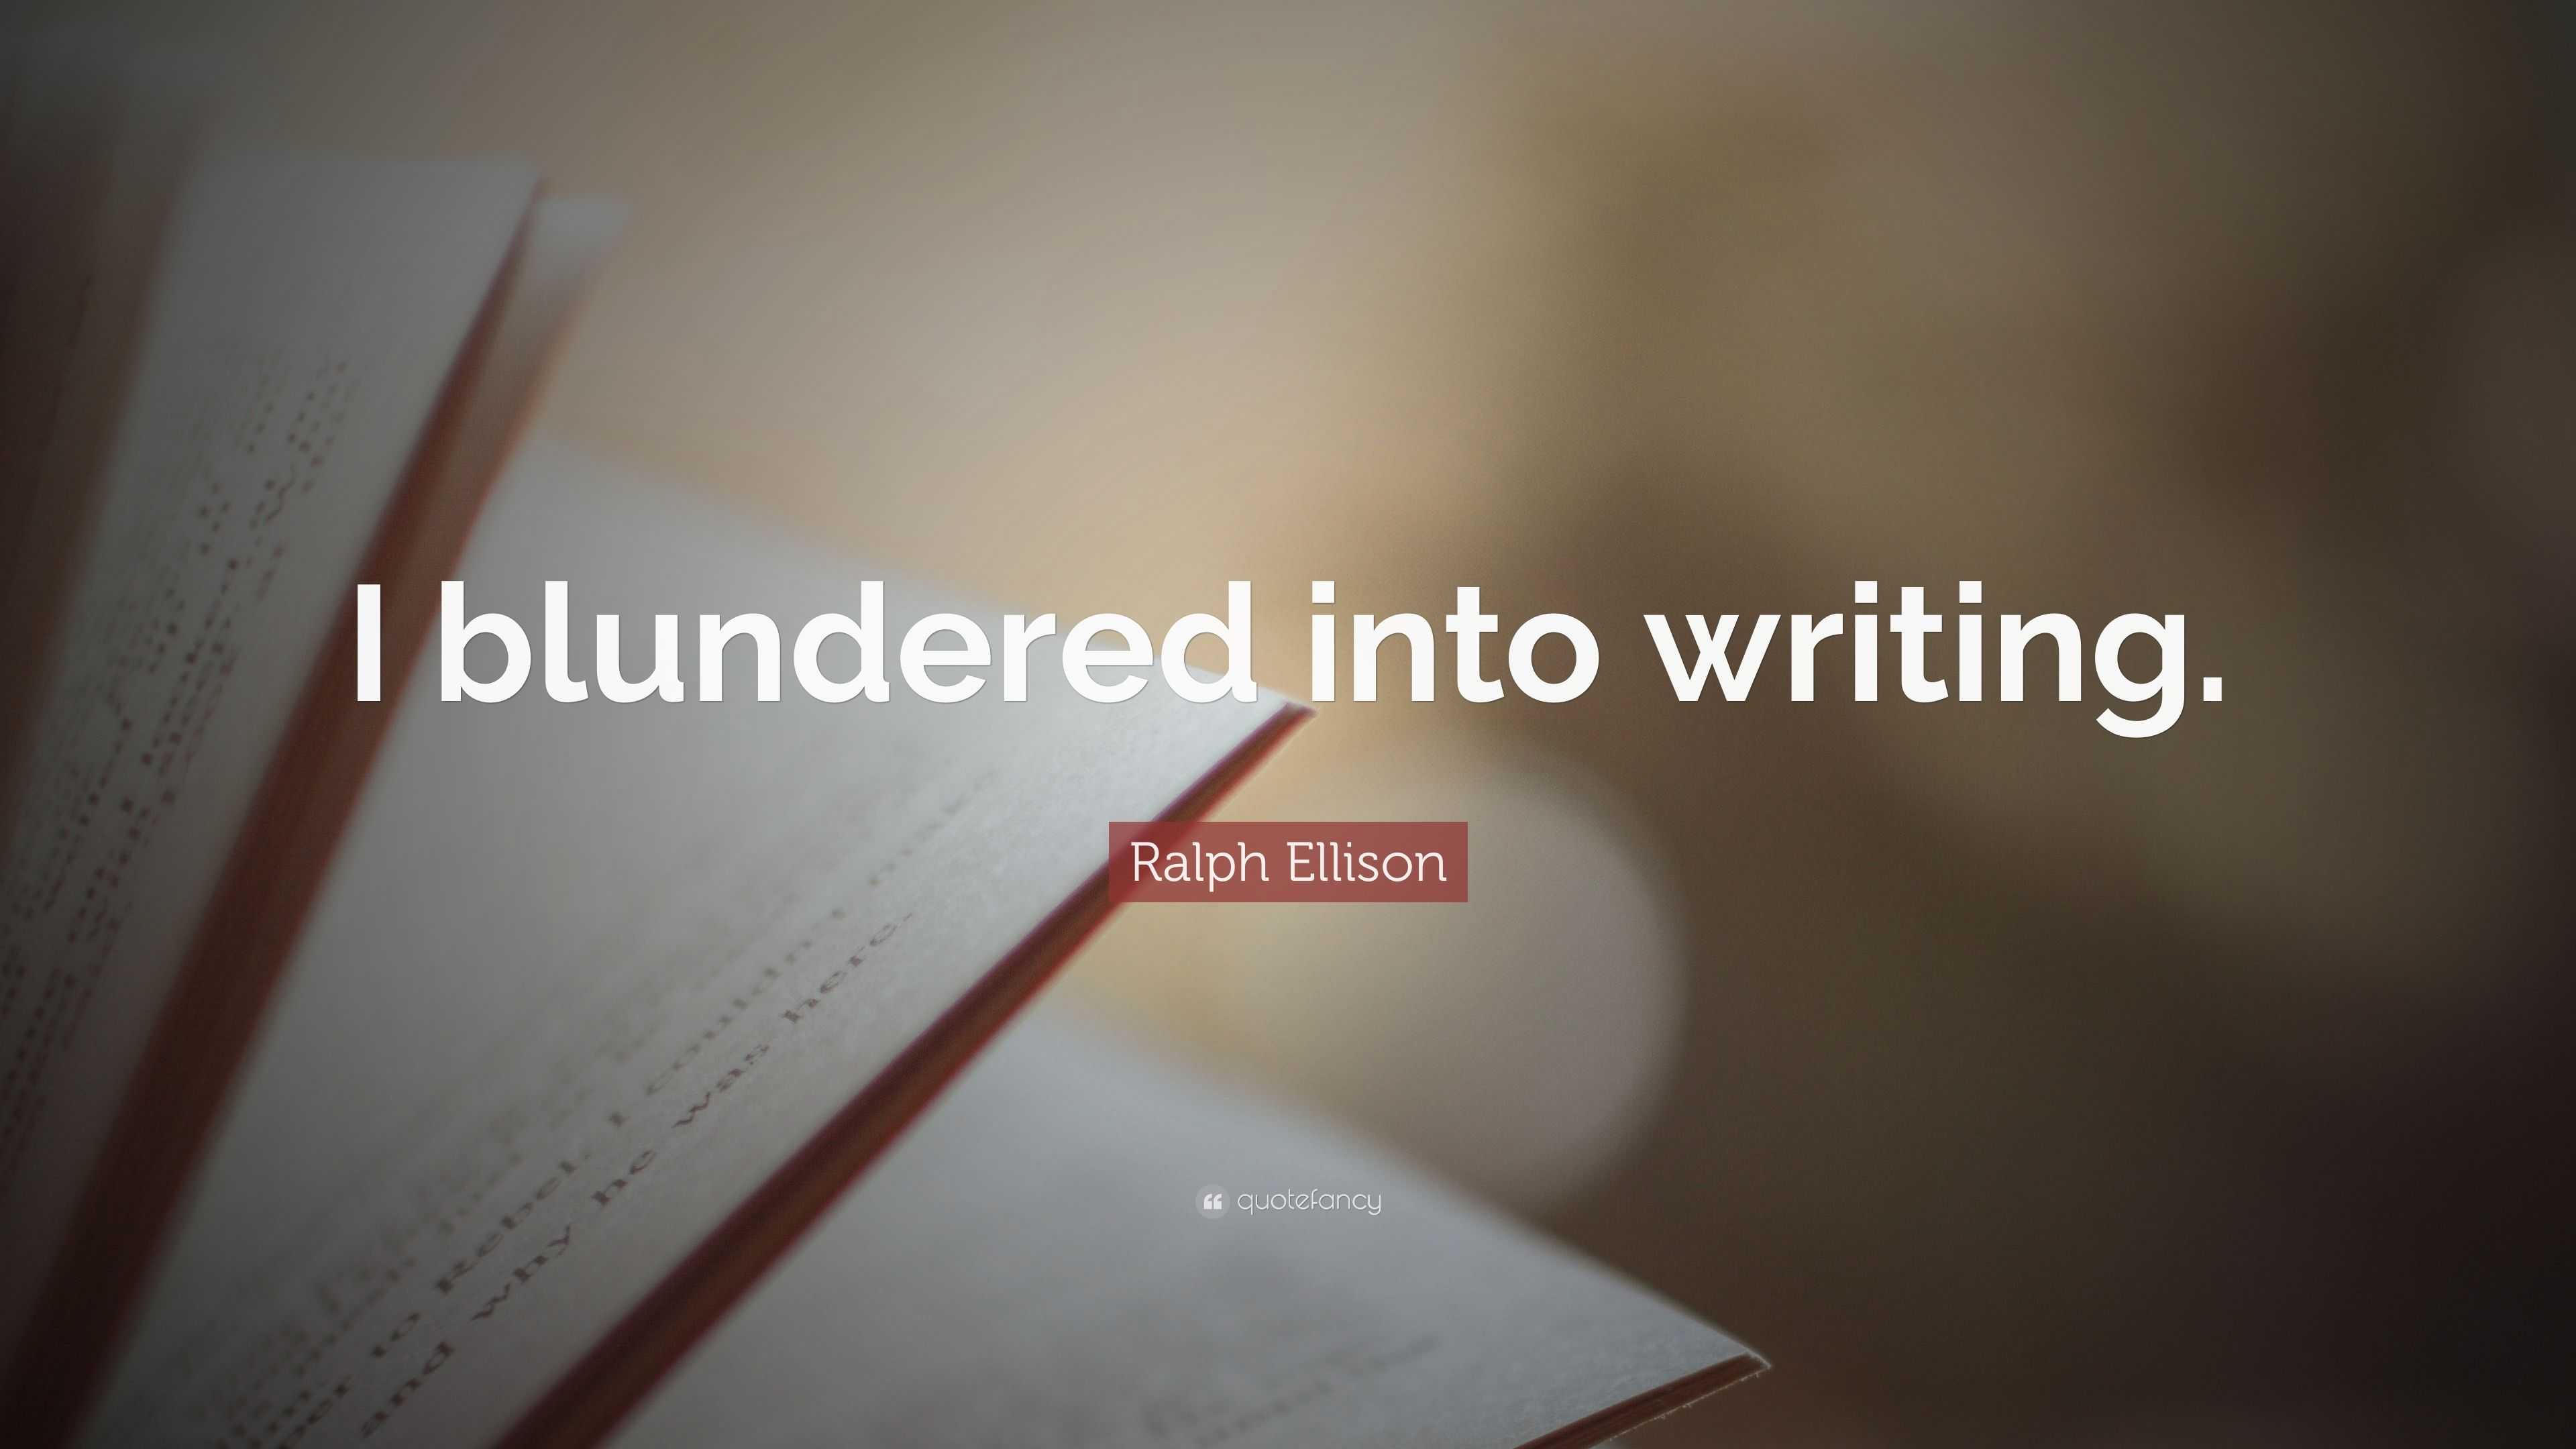 Ralph Ellison Quote: “I blundered into writing.”